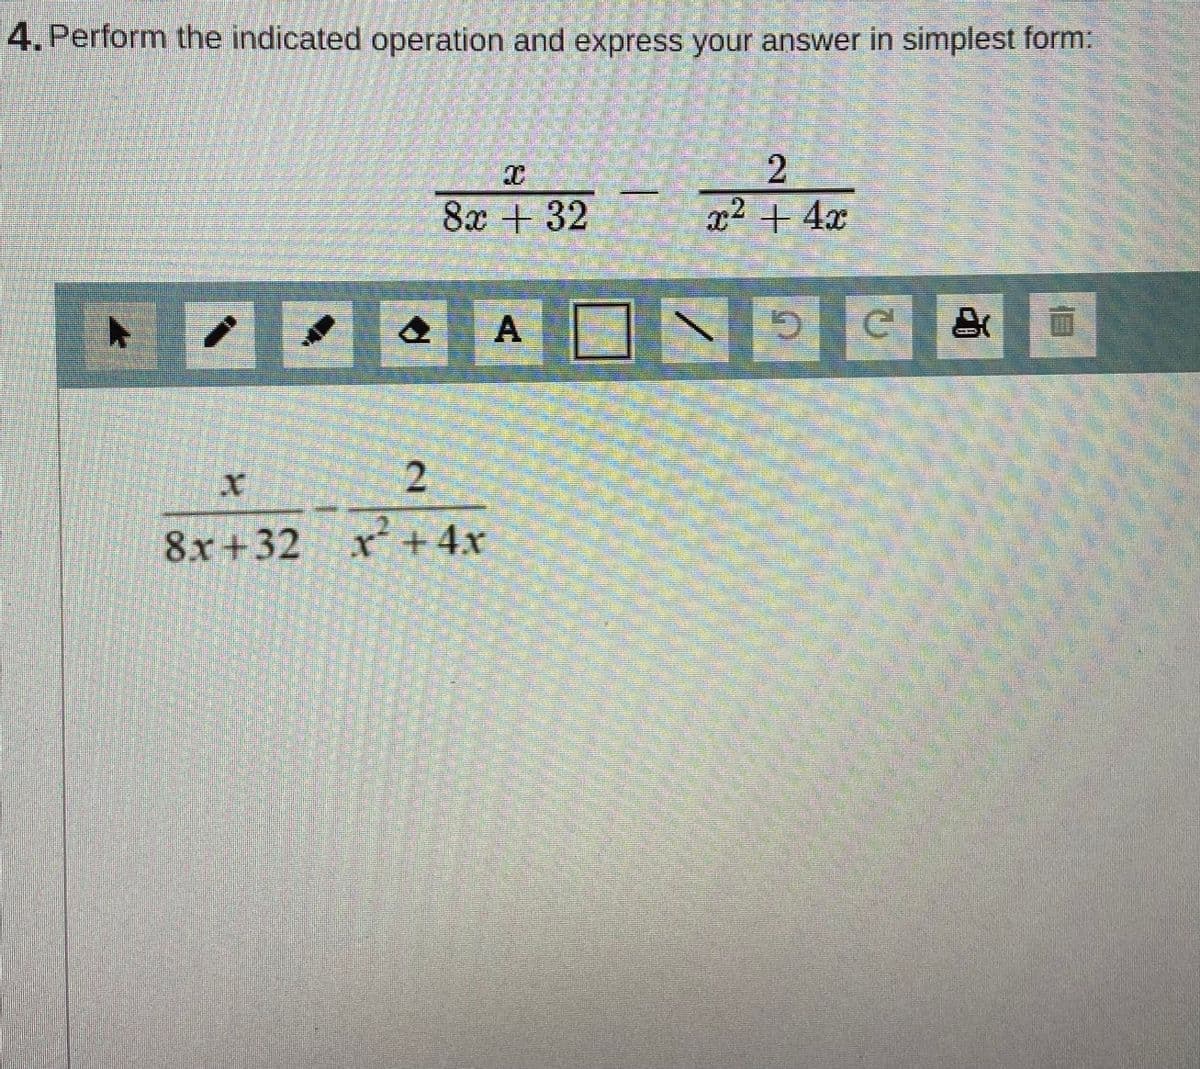 4. Perform the indicated operation and express your answer in simplest form:
8x + 32 x2 + 4x
2.
8x+32
x+4x
